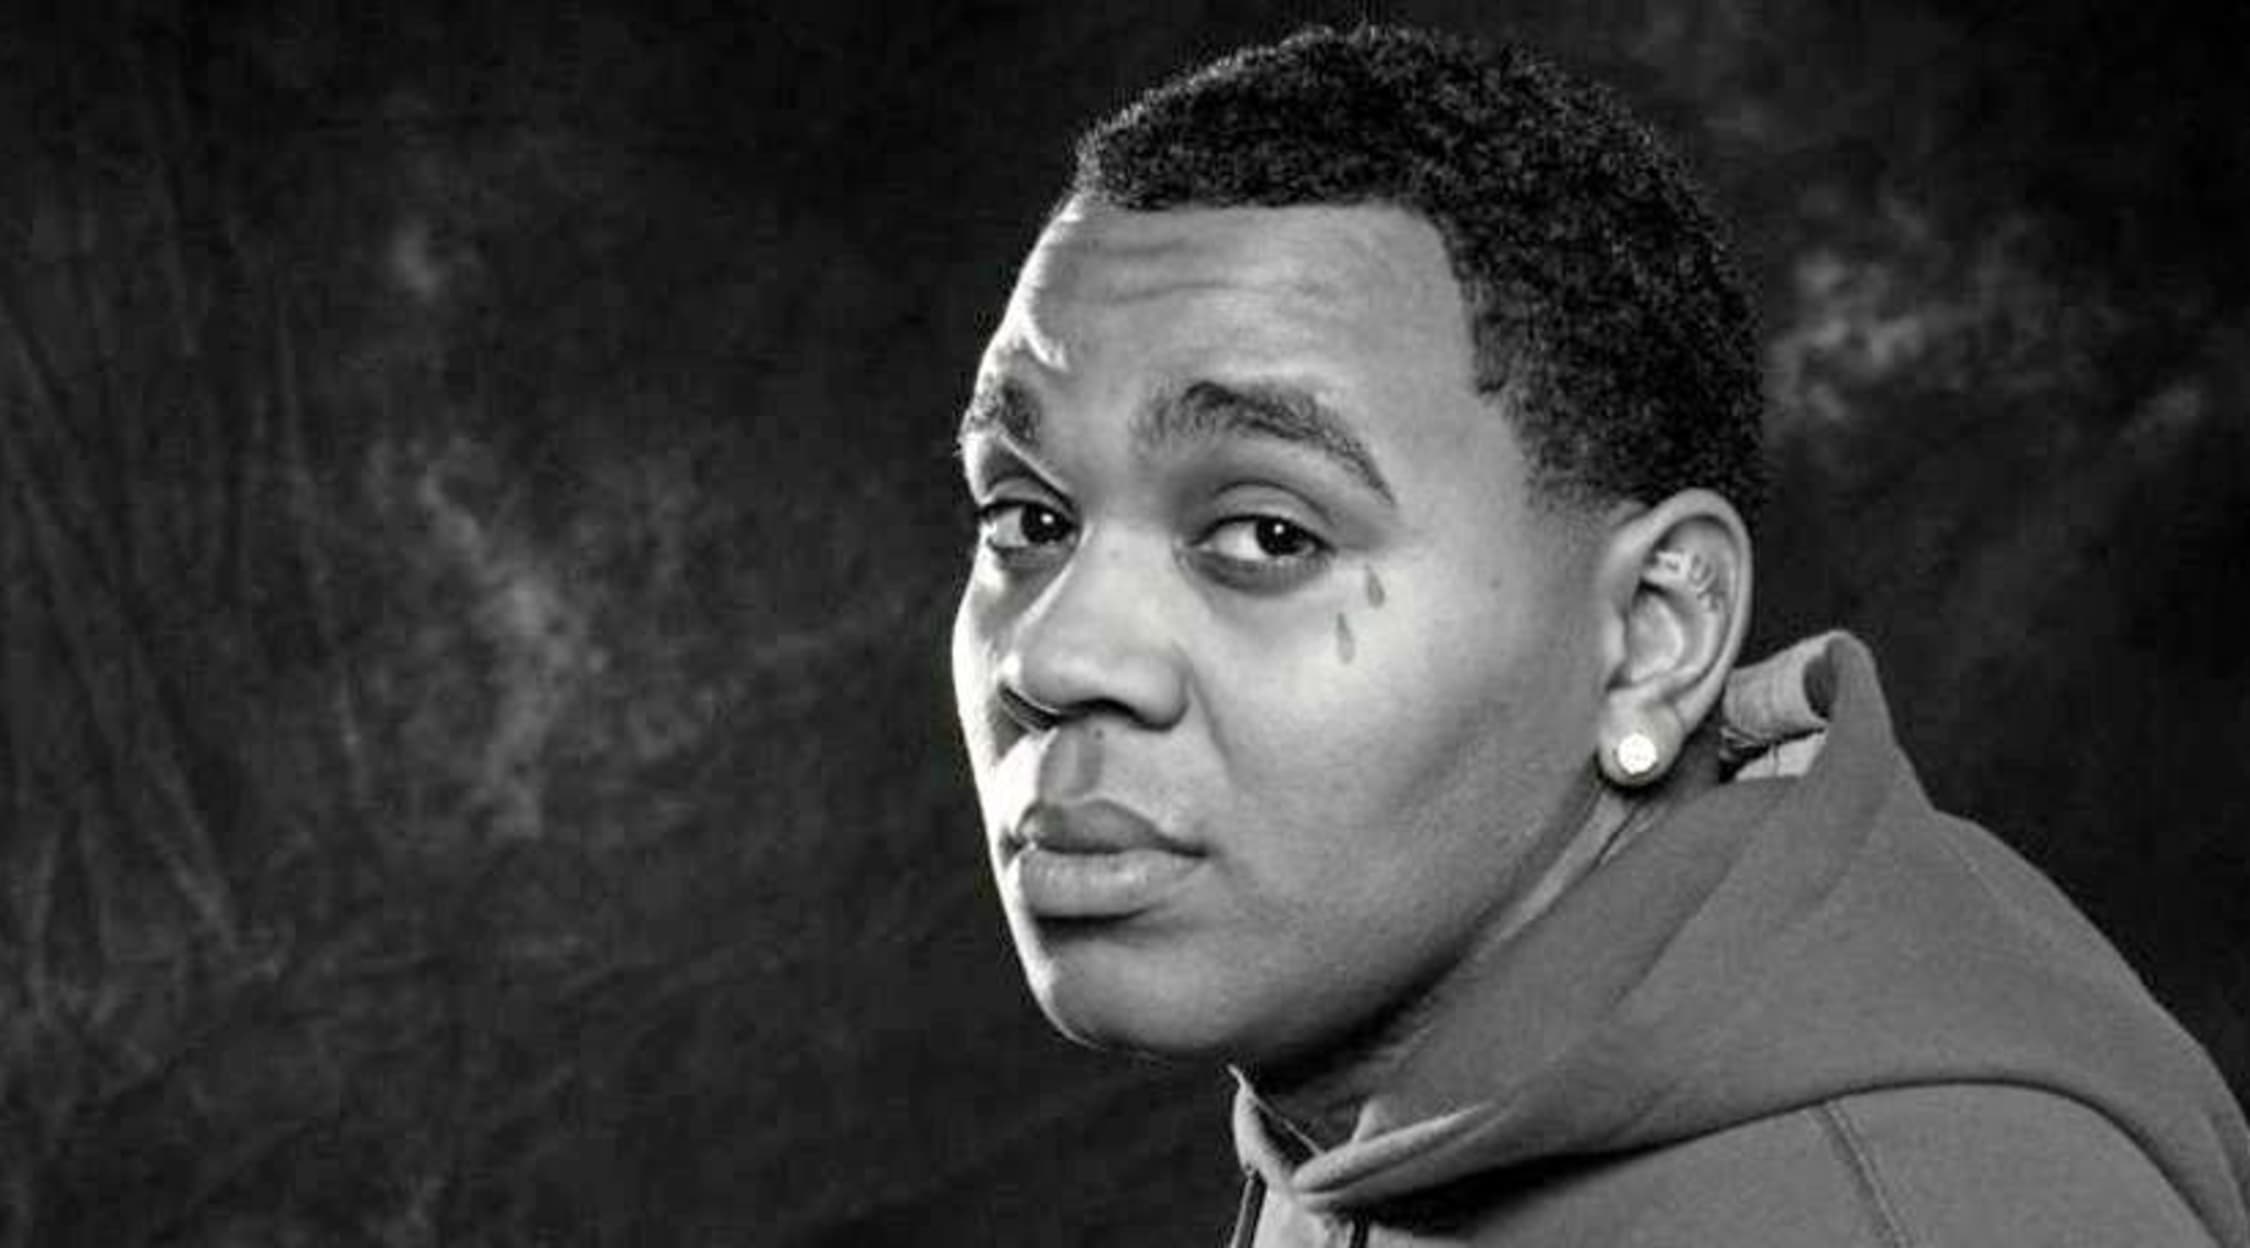 Seattle kevin gates in kevin gates